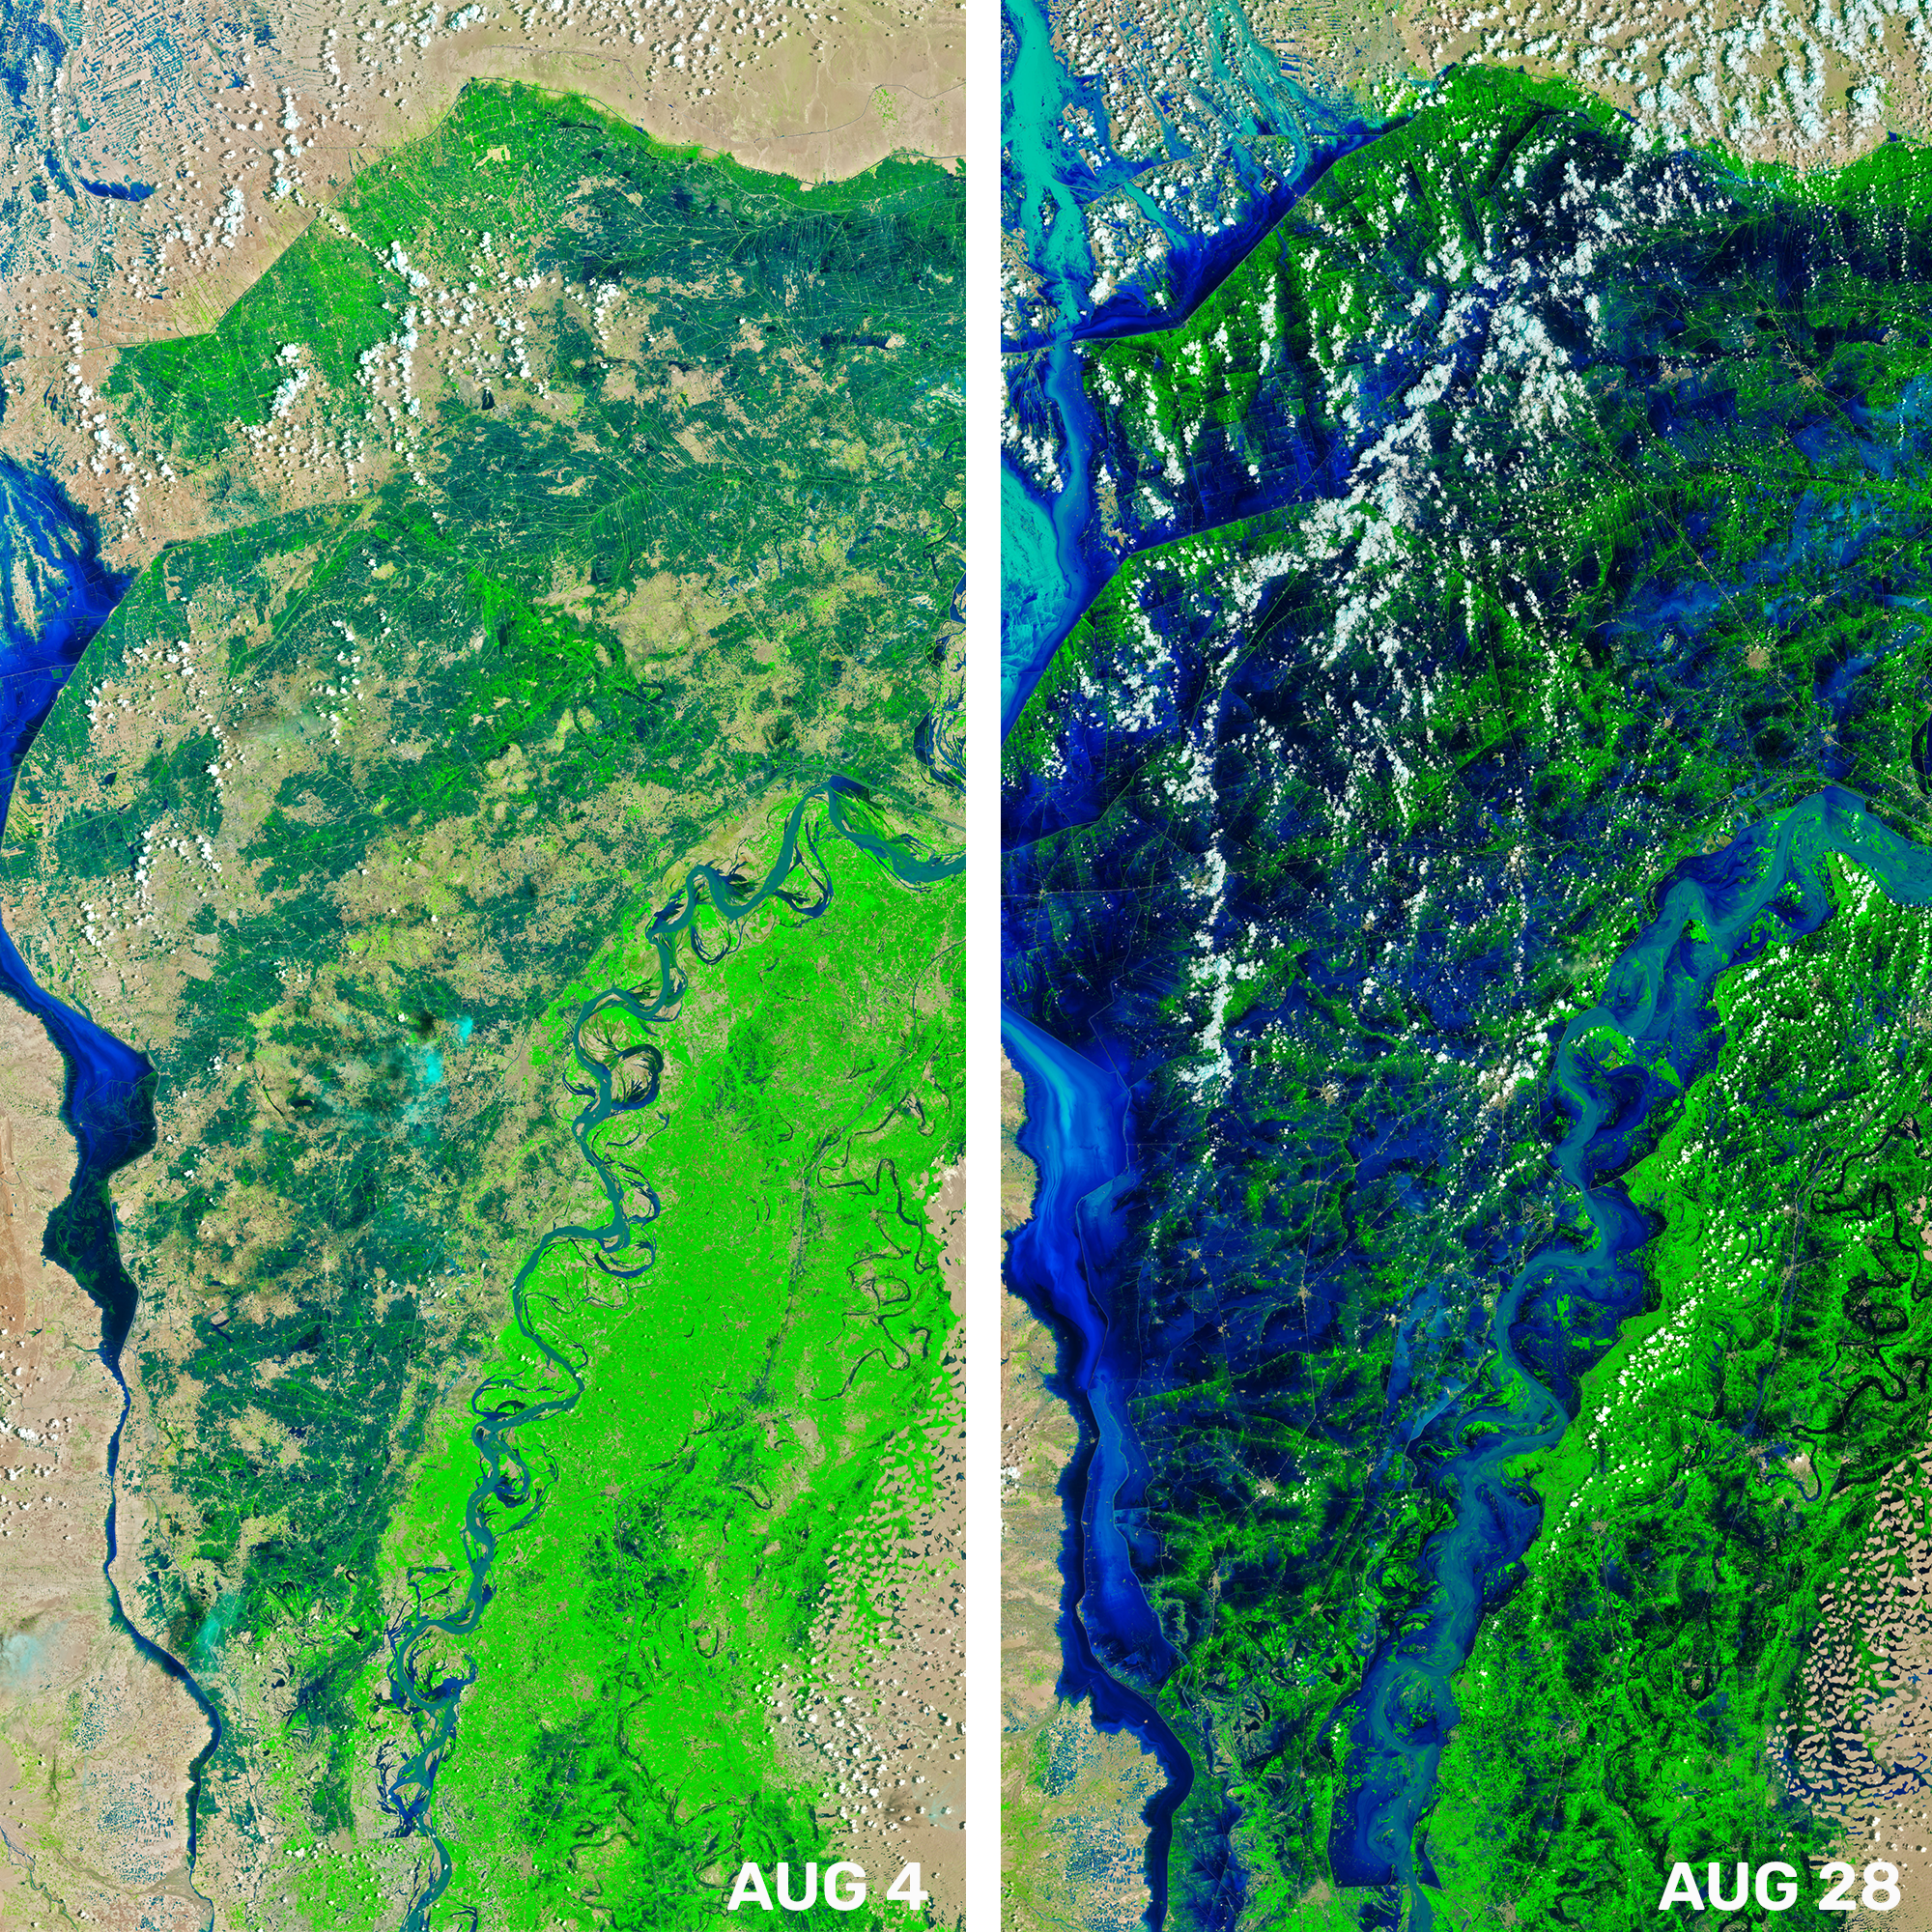 Two side by side satellite images that demonstrate the immense flooding in Pakistan